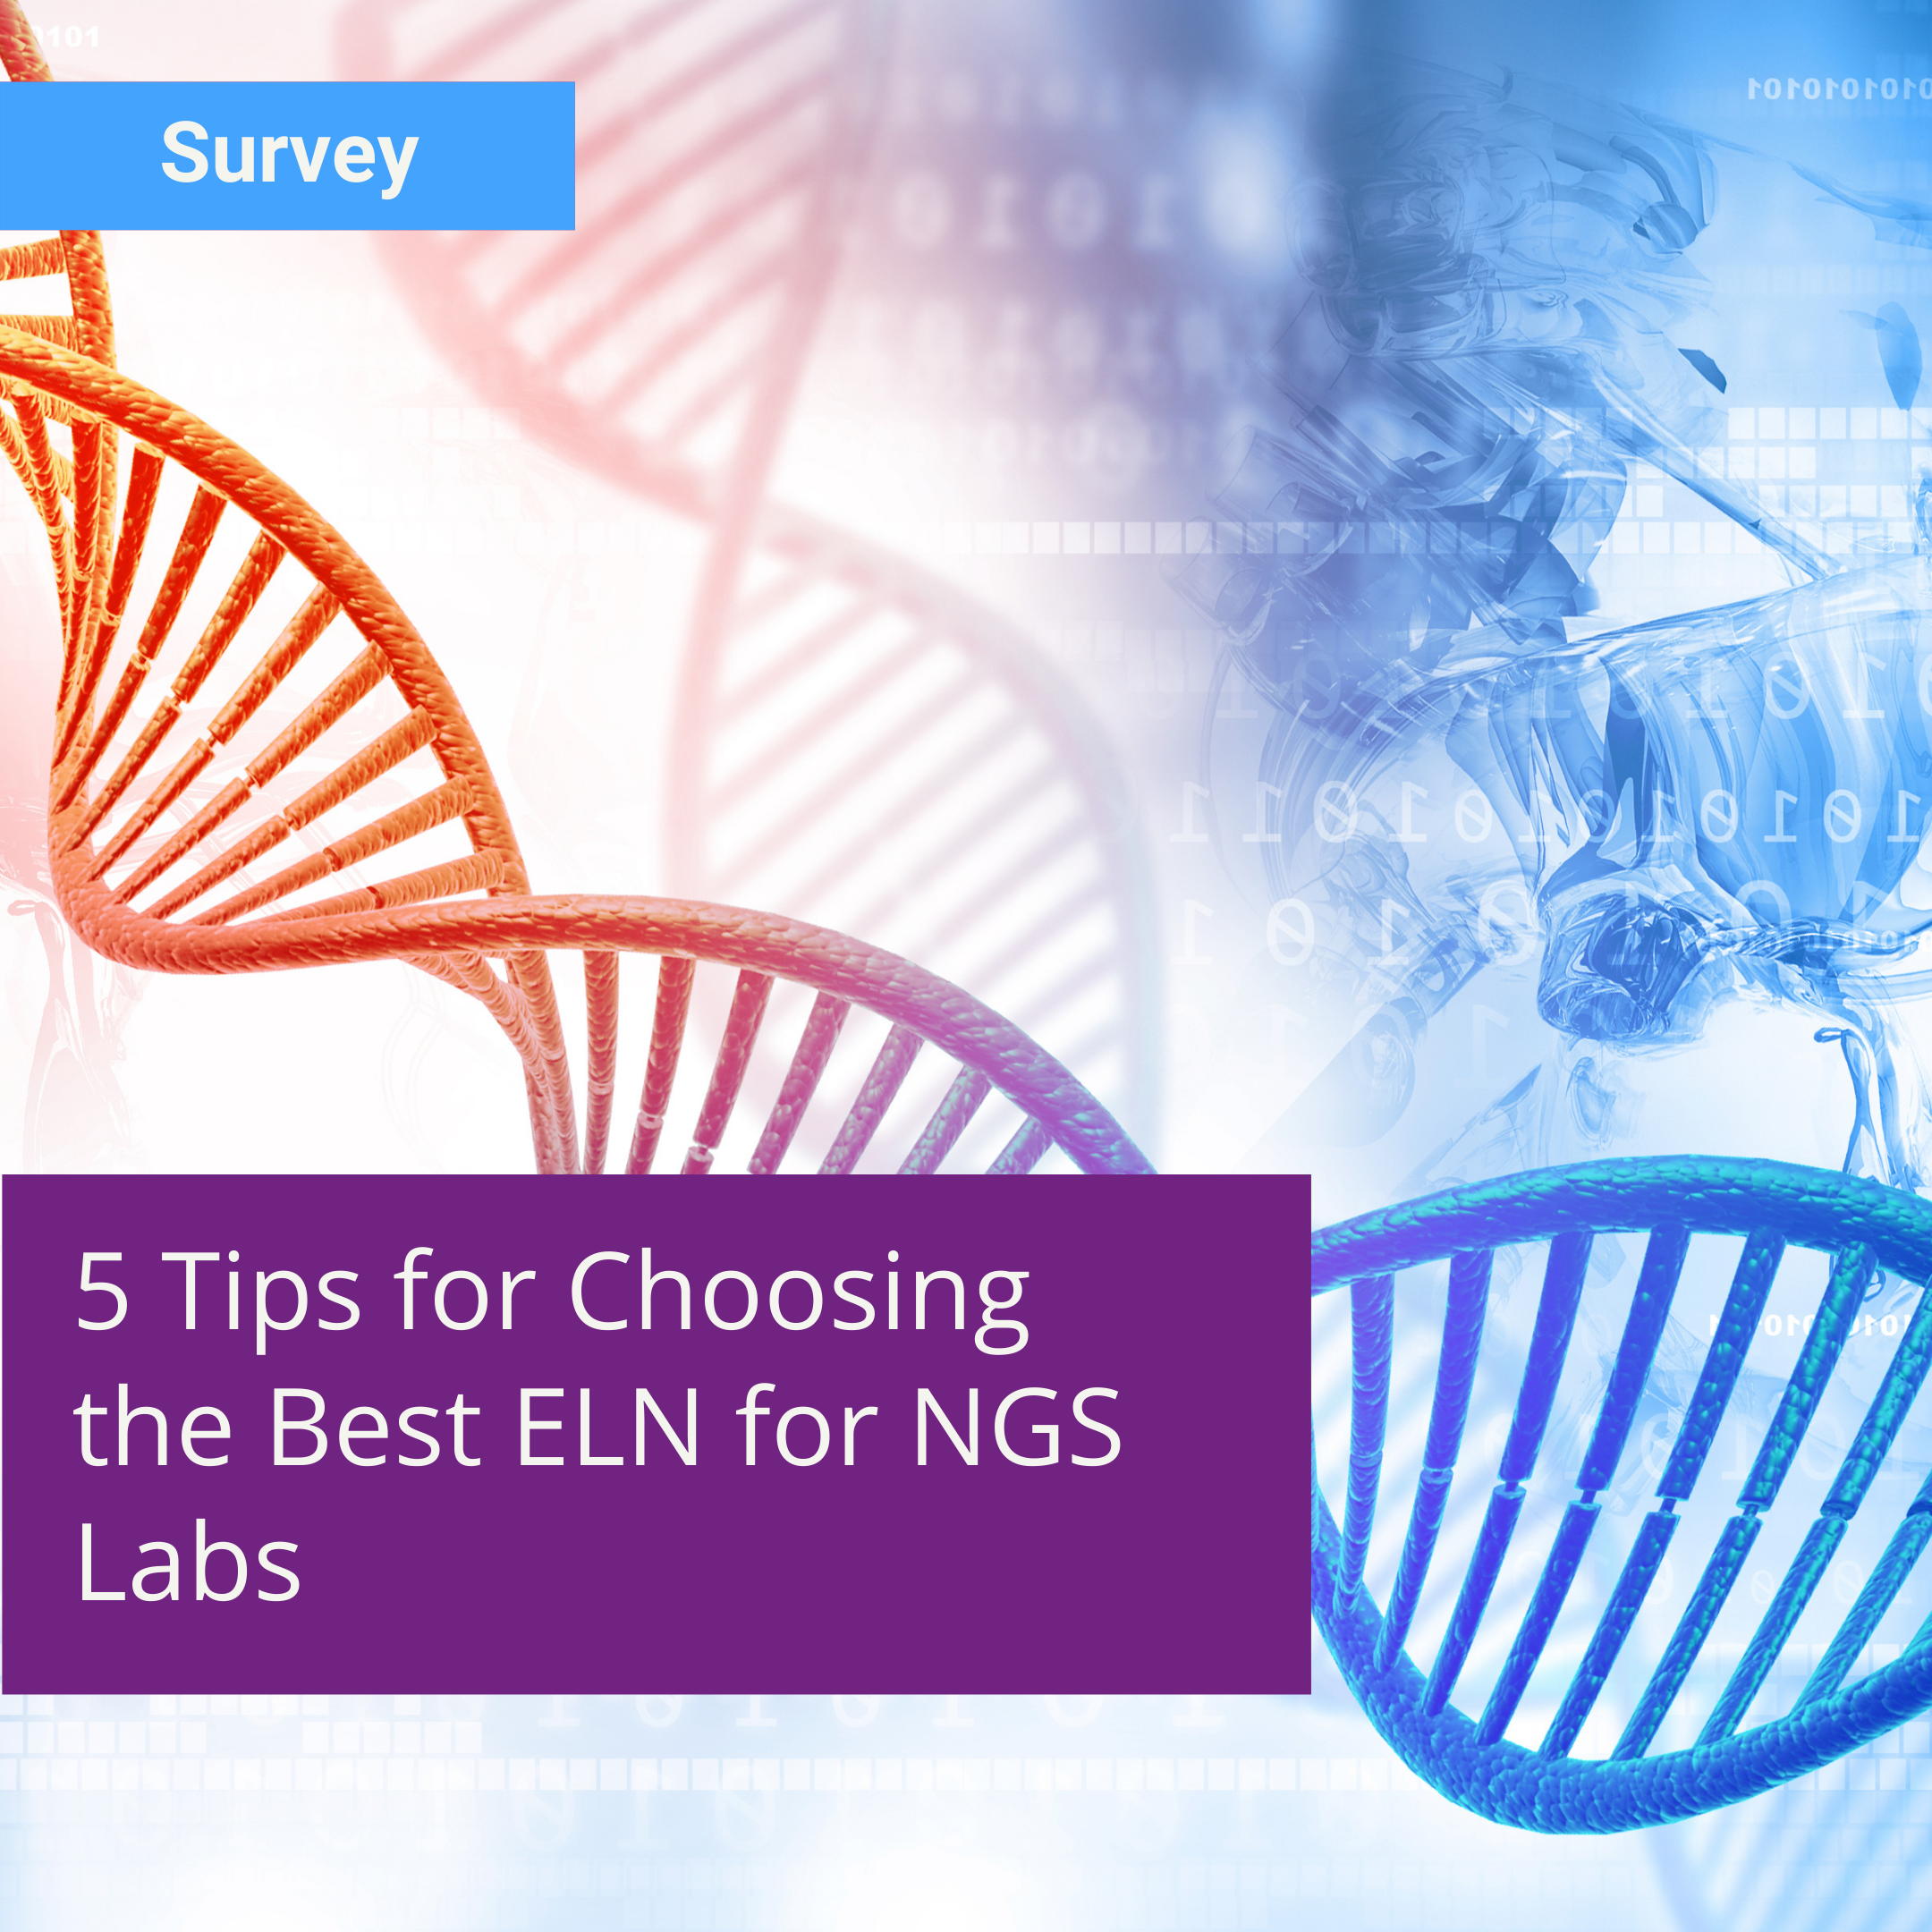 Choosing the best ELN for NGS labs